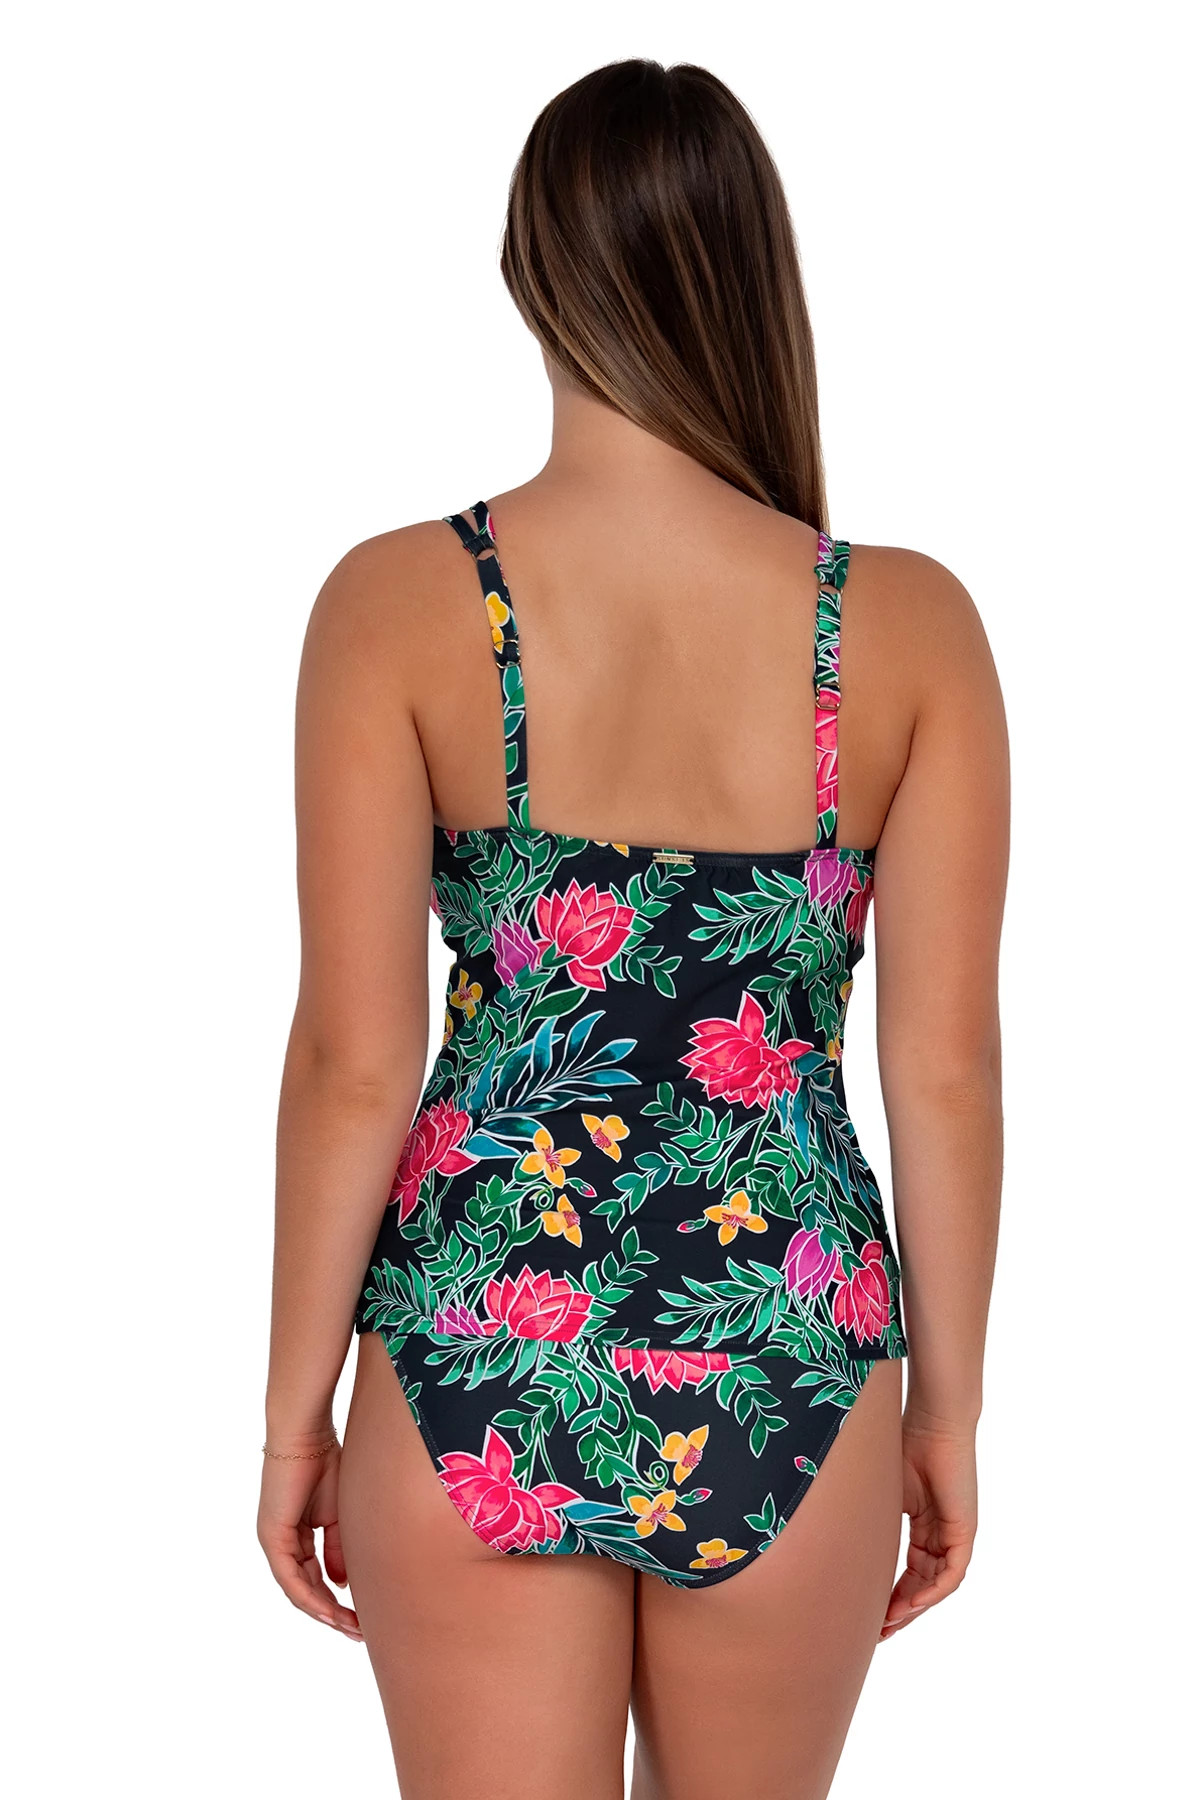 TWILIGHT BLOOMS Taylor Underwire Tankini Top (D+ Cup) image number 2